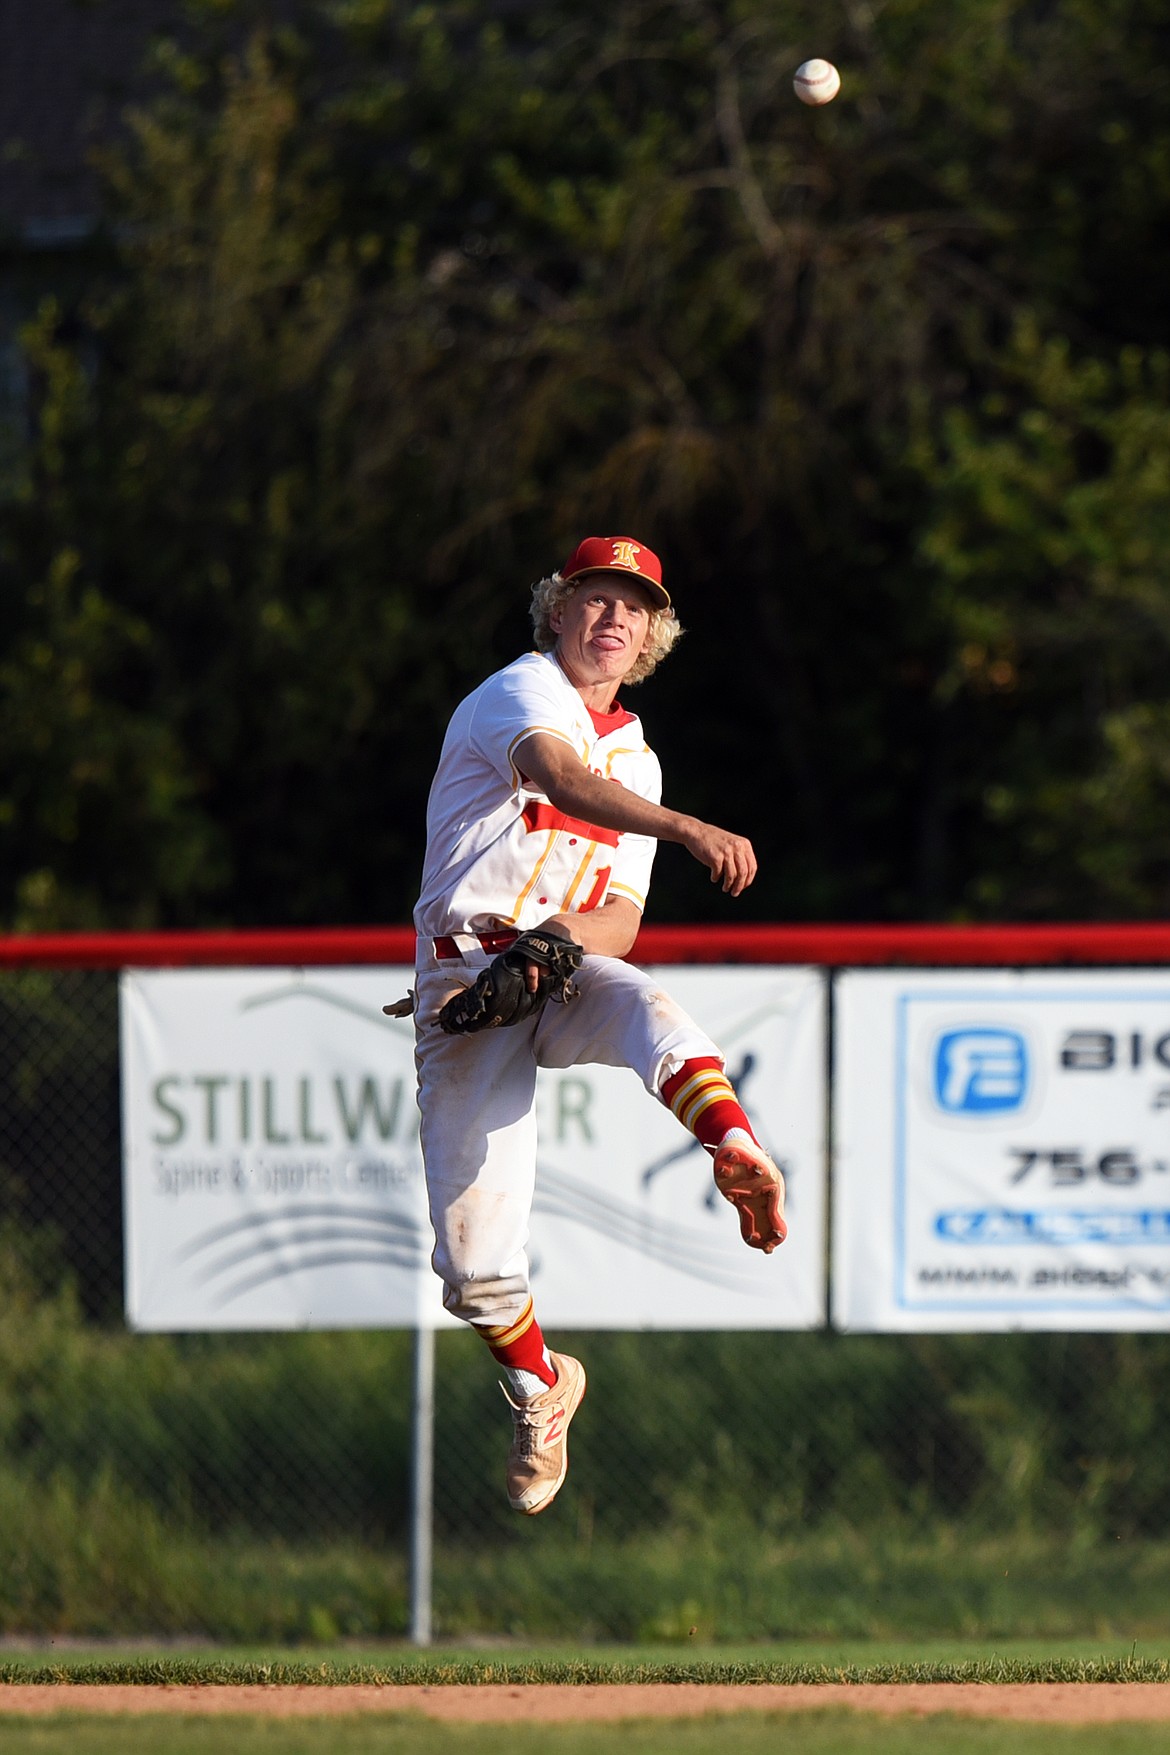 Kalispell Lakers AA shortstop Connor Drish leaps and fires to first after fielding a second-inning grounder hit by Helena Senators AA's Ethan Keinitz at Griffin Field on Saturday. Keinitz was safe at first on the play. (Casey Kreider/Daily Inter Lake)